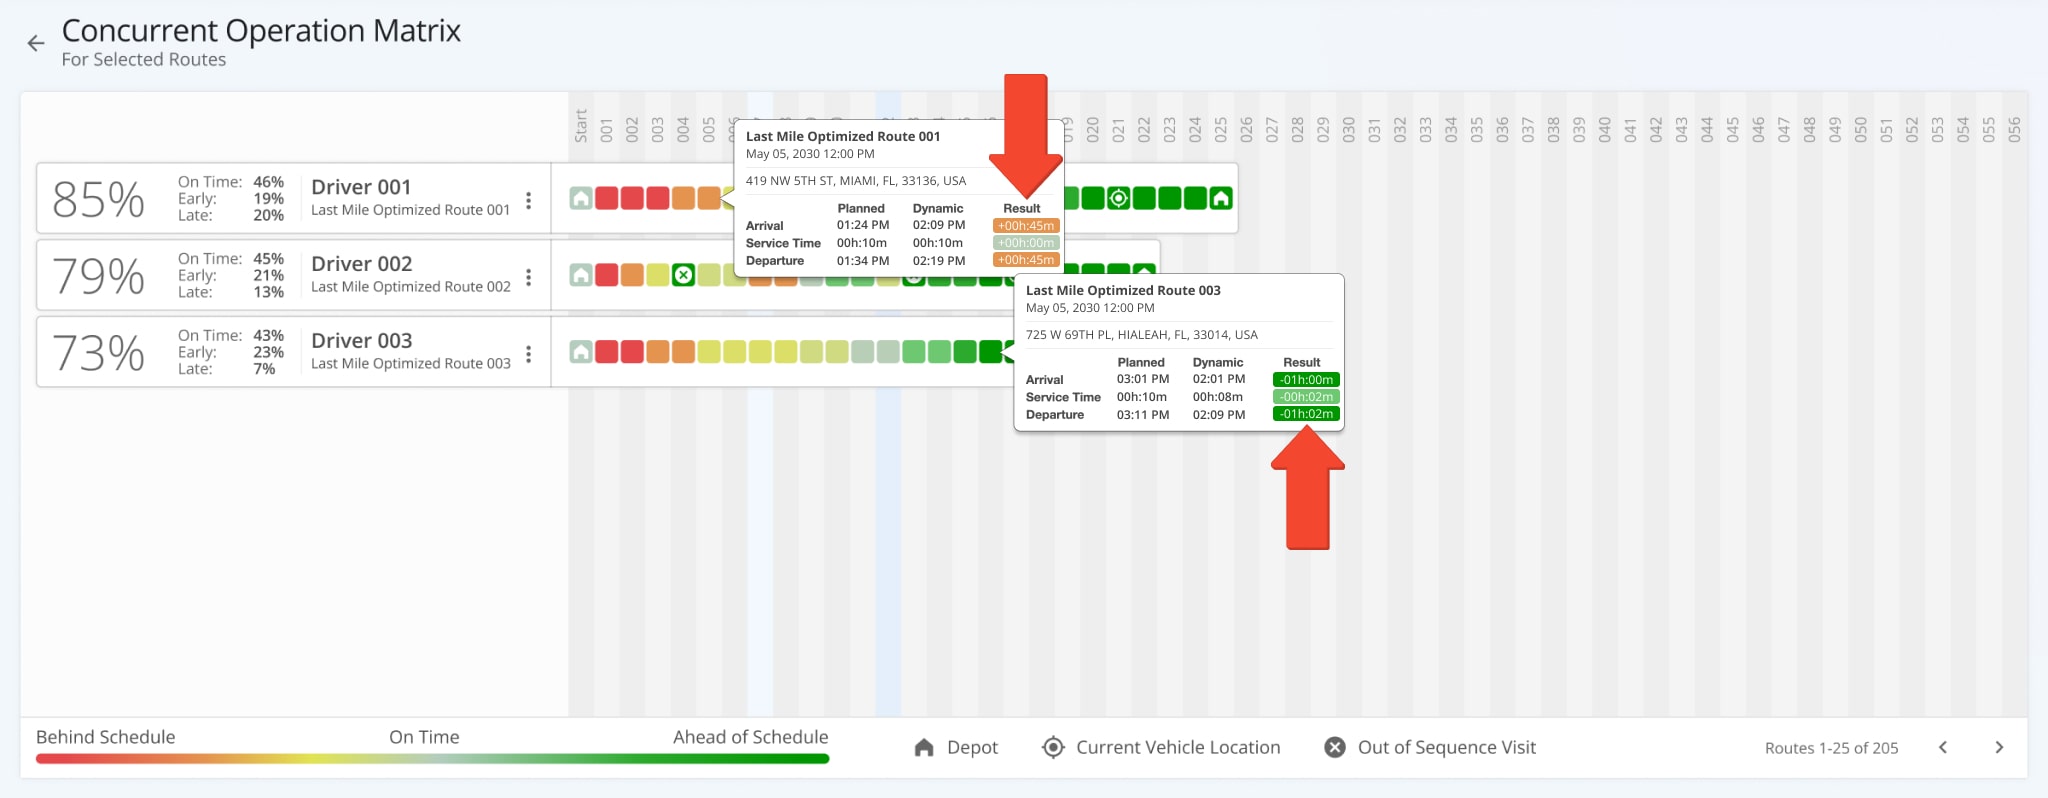 To see stop schedule details, hover over the respective stop in the Operation Matrix.